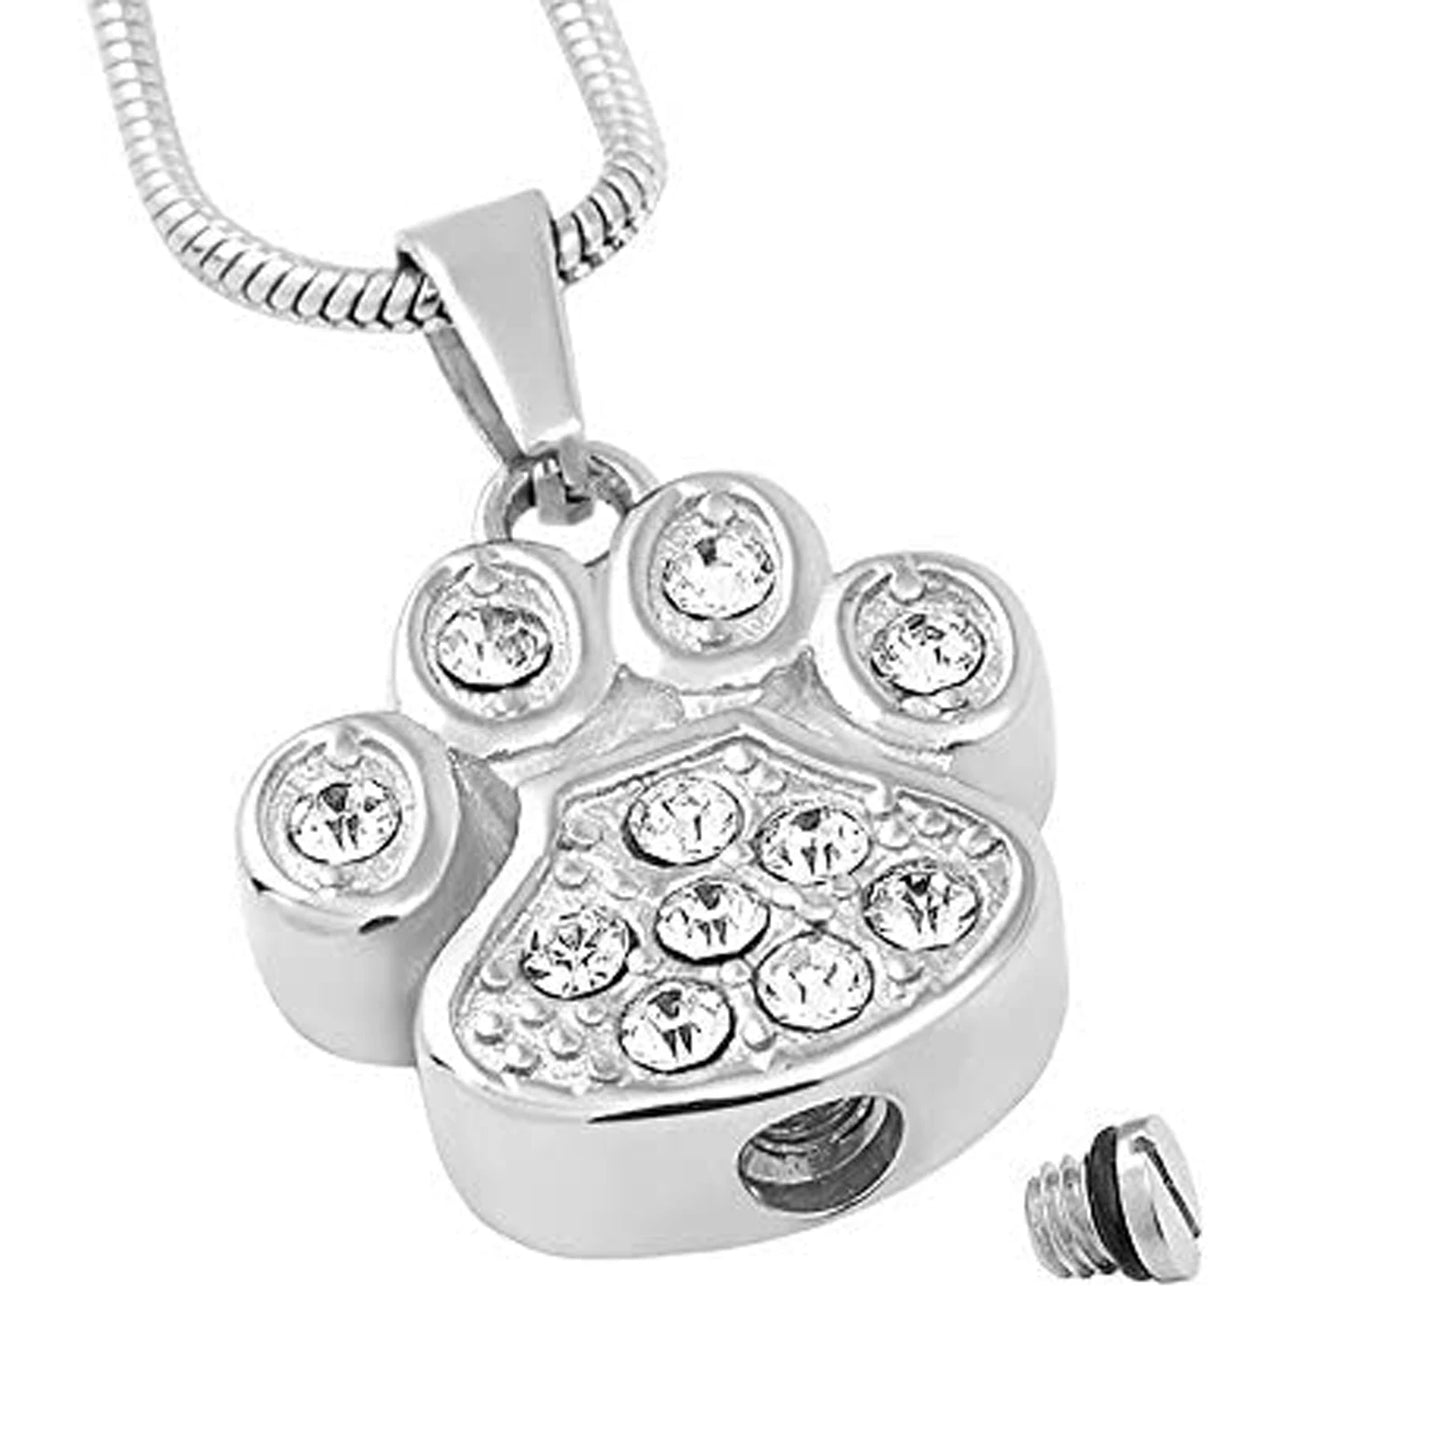 Jeweled Pet Paw Cremation Jewelry For Ashes Keepsake Pendant Necklace